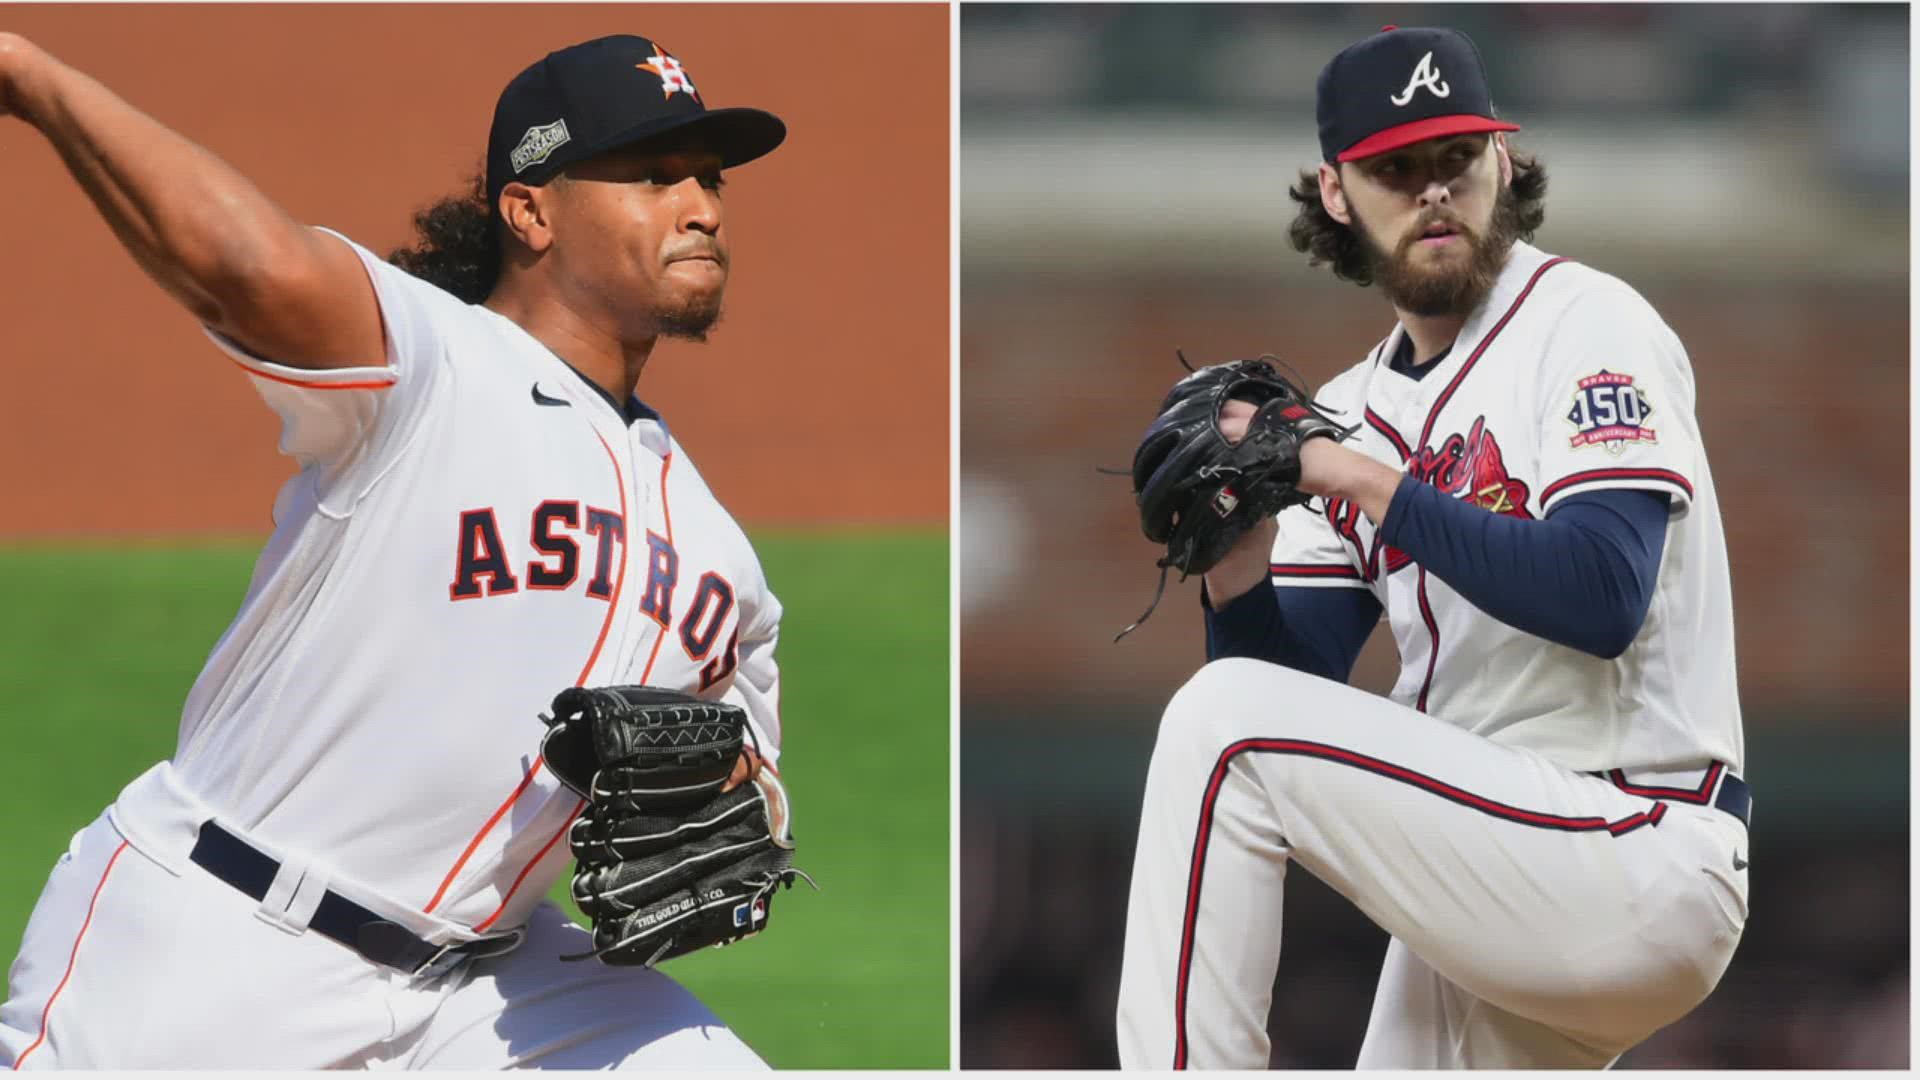 Jason Bristol & Jeremy Booth talk expectations for the Astros in Truist Park, while Xavier Walton talks to fans of the Atlanta Braves.